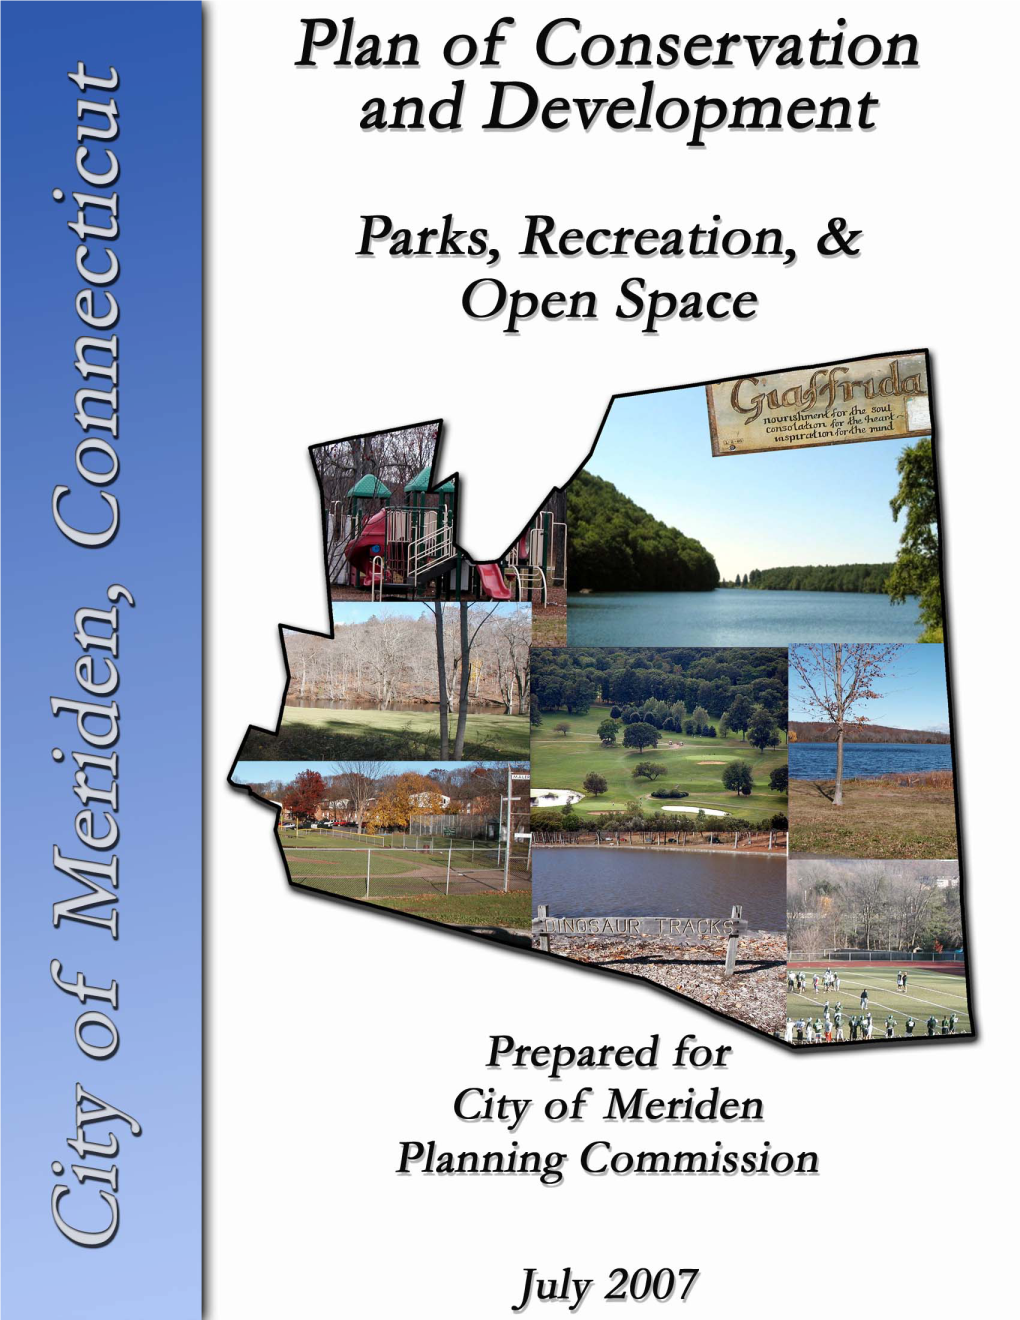 Parks, Recreation, & Open Space